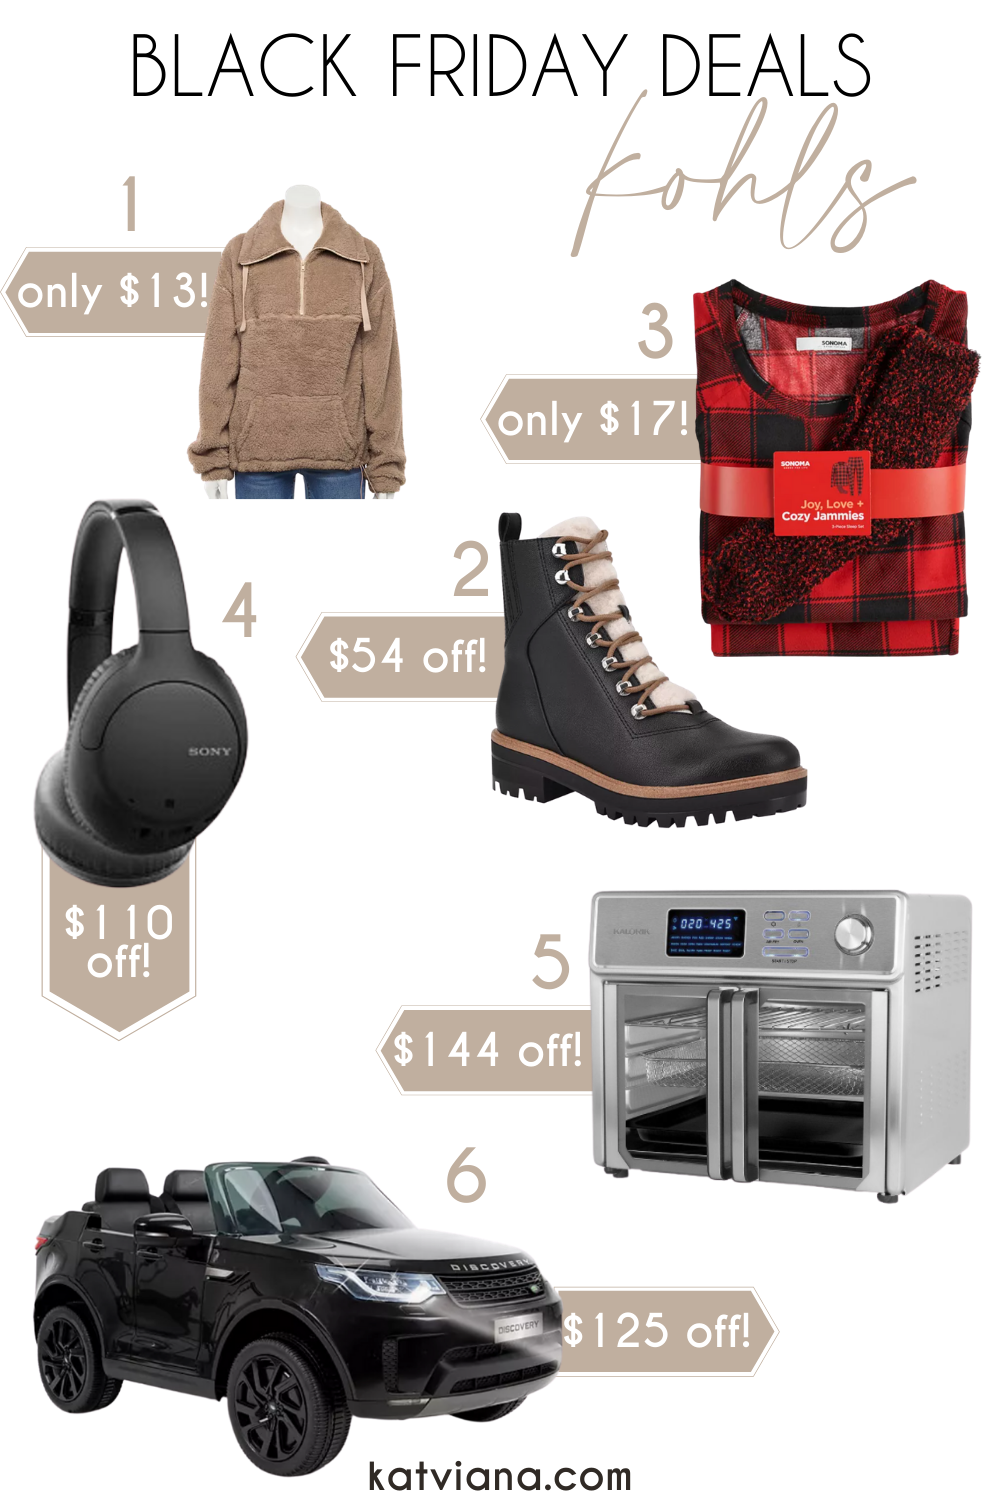 The best Black Friday deals from Kohls: Cozy fleece jacket only $13, Sony noise cancelling headphones $110 off, pajama sets for only $17 and child ride-on cars for $125 off! | Kat Viana